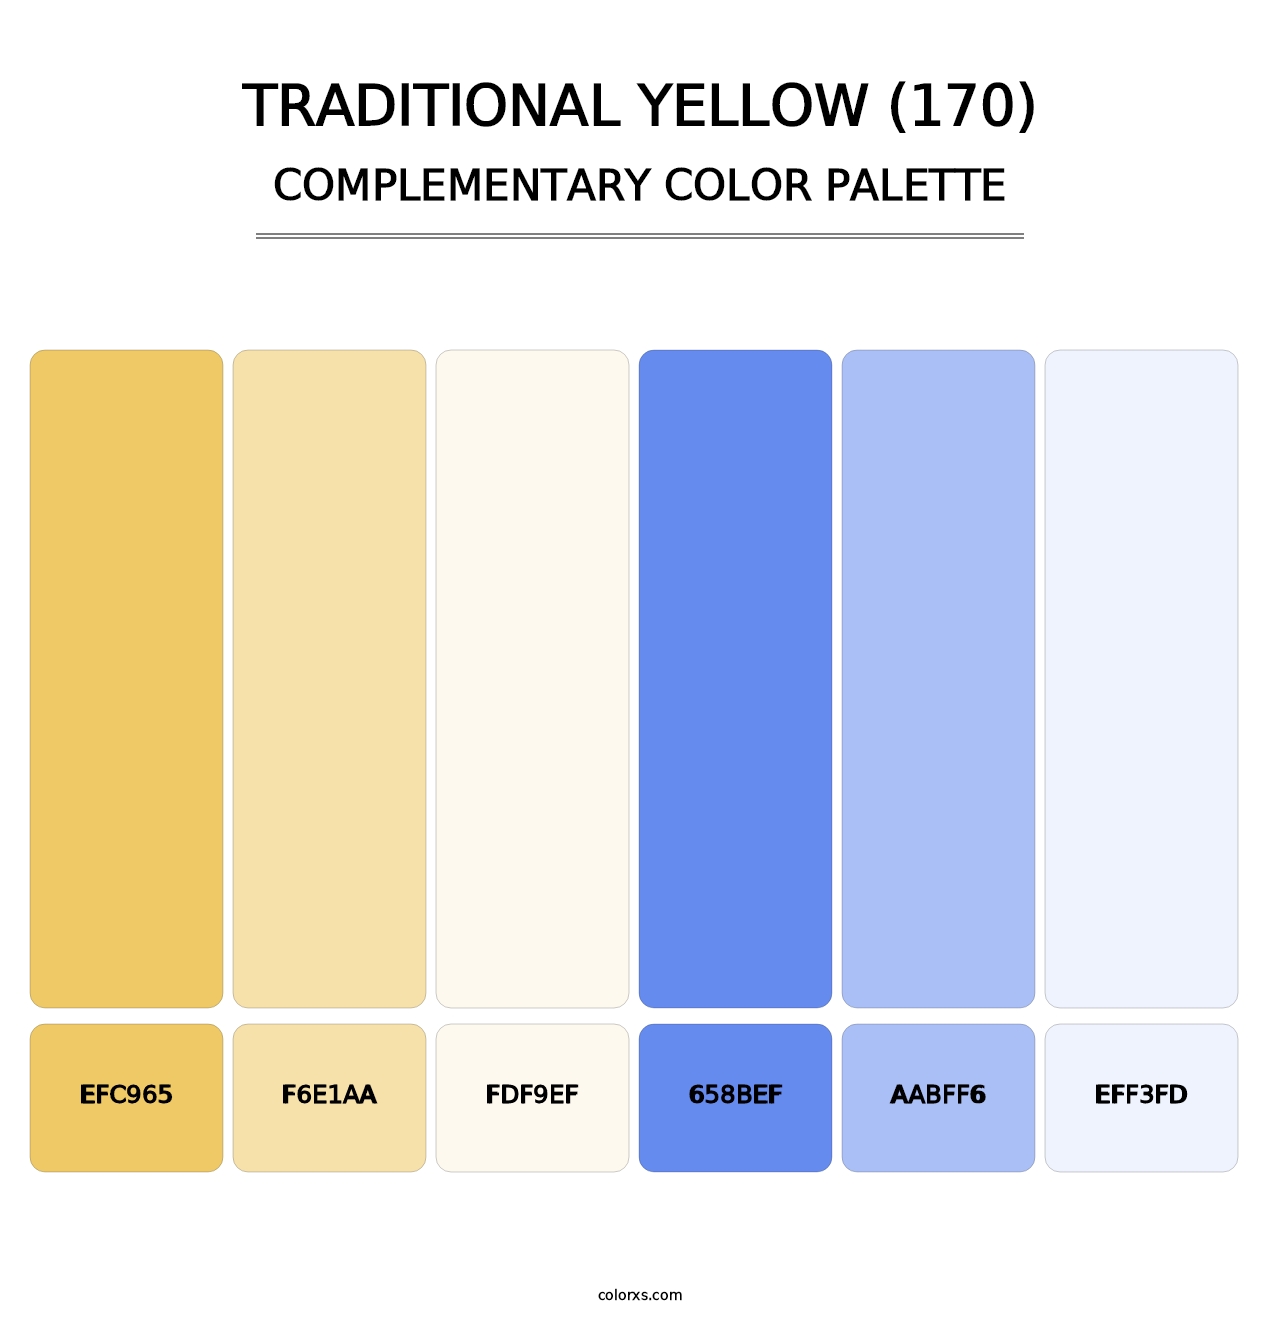 Traditional Yellow (170) - Complementary Color Palette